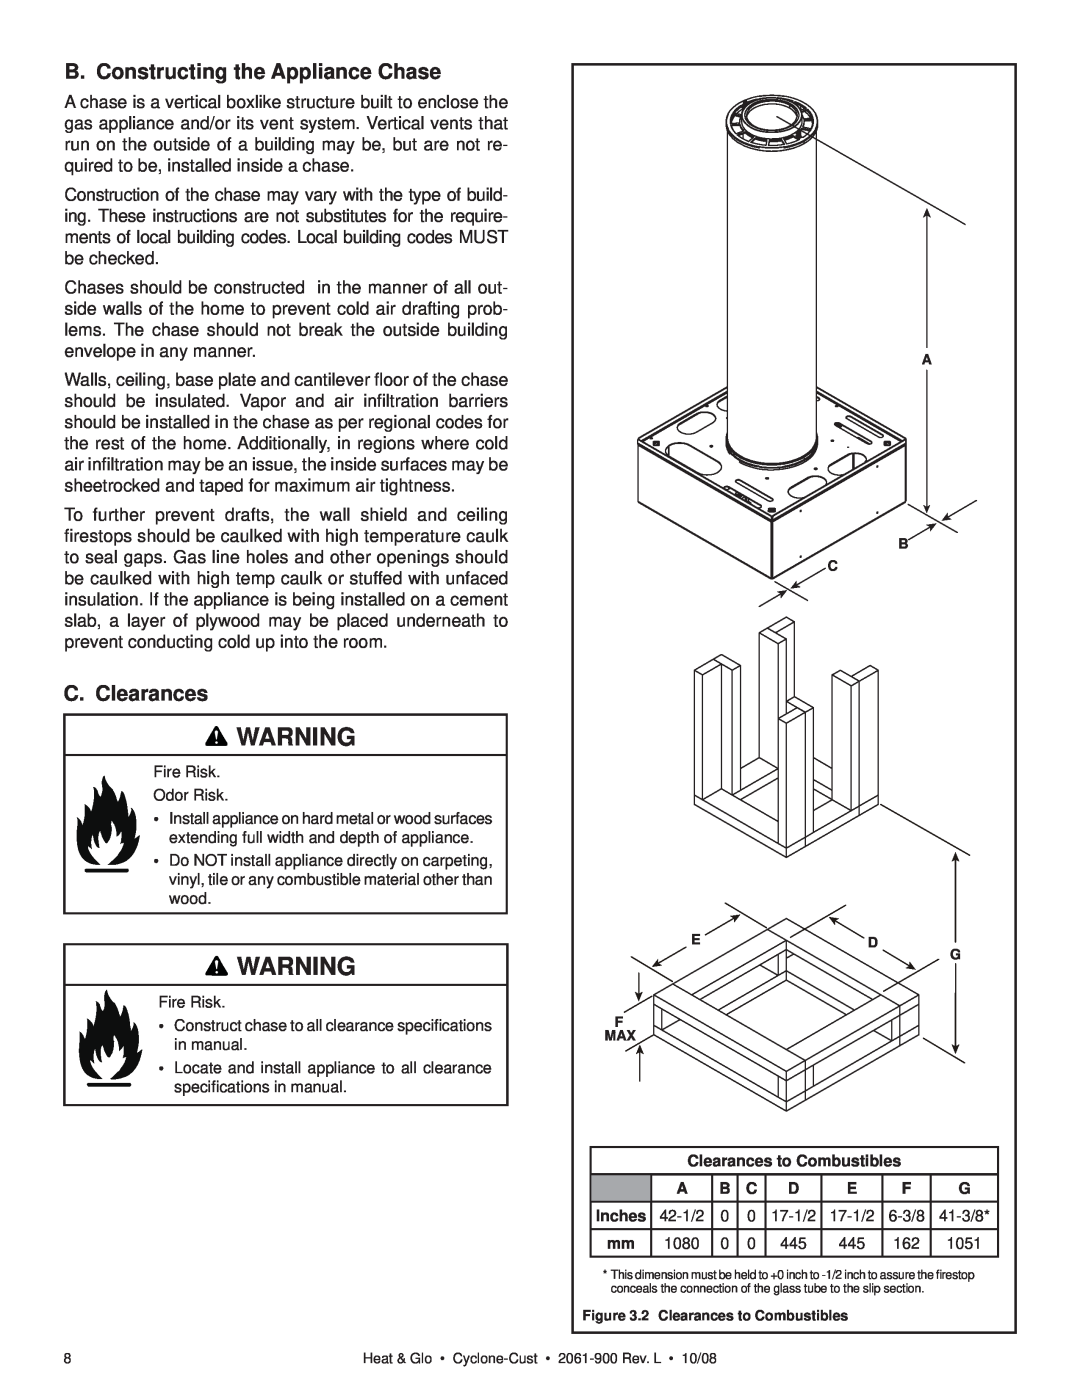 Hearth and Home Technologies Cyclone-Cust owner manual B. Constructing the Appliance Chase, C. Clearances, C Ed F Max 